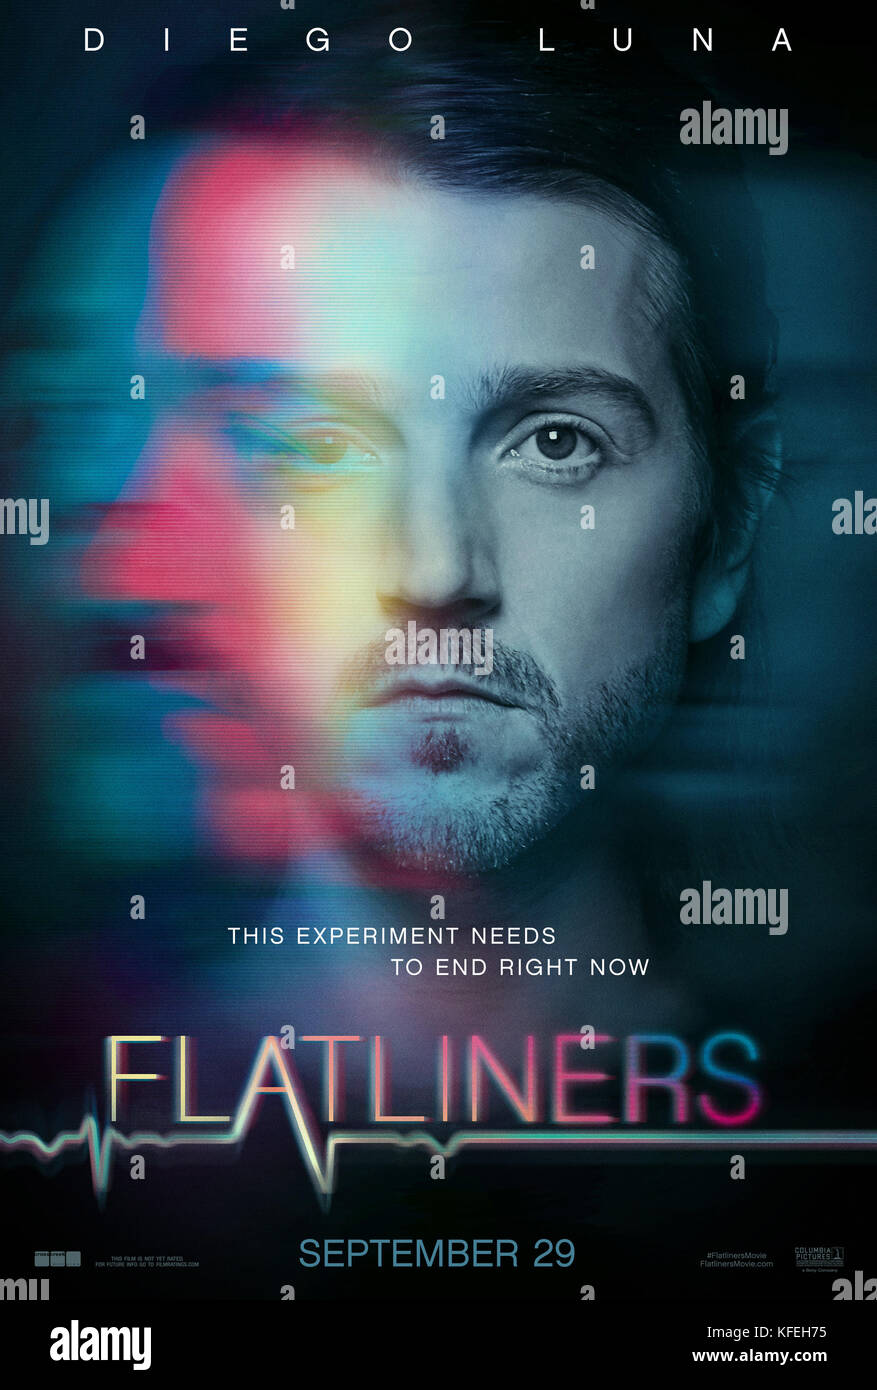 RELEASE DATE: September 29, 2017 TITLE: Flatliners. STUDIO: Columbia Pictures. DIRECTOR: Niels Arden Oplev. PLOT: Five medical students, obsessed by what lies beyond the confines of life, embark on a daring experiment: by stopping their hearts for short periods, each triggers a near-death experience - giving them a firsthand account of the afterlife. STARRING: Poster Art DIEGO LUNA as Ray. (Credit Image: © Columbia Pictures/Entertainment Pictures) Stock Photo